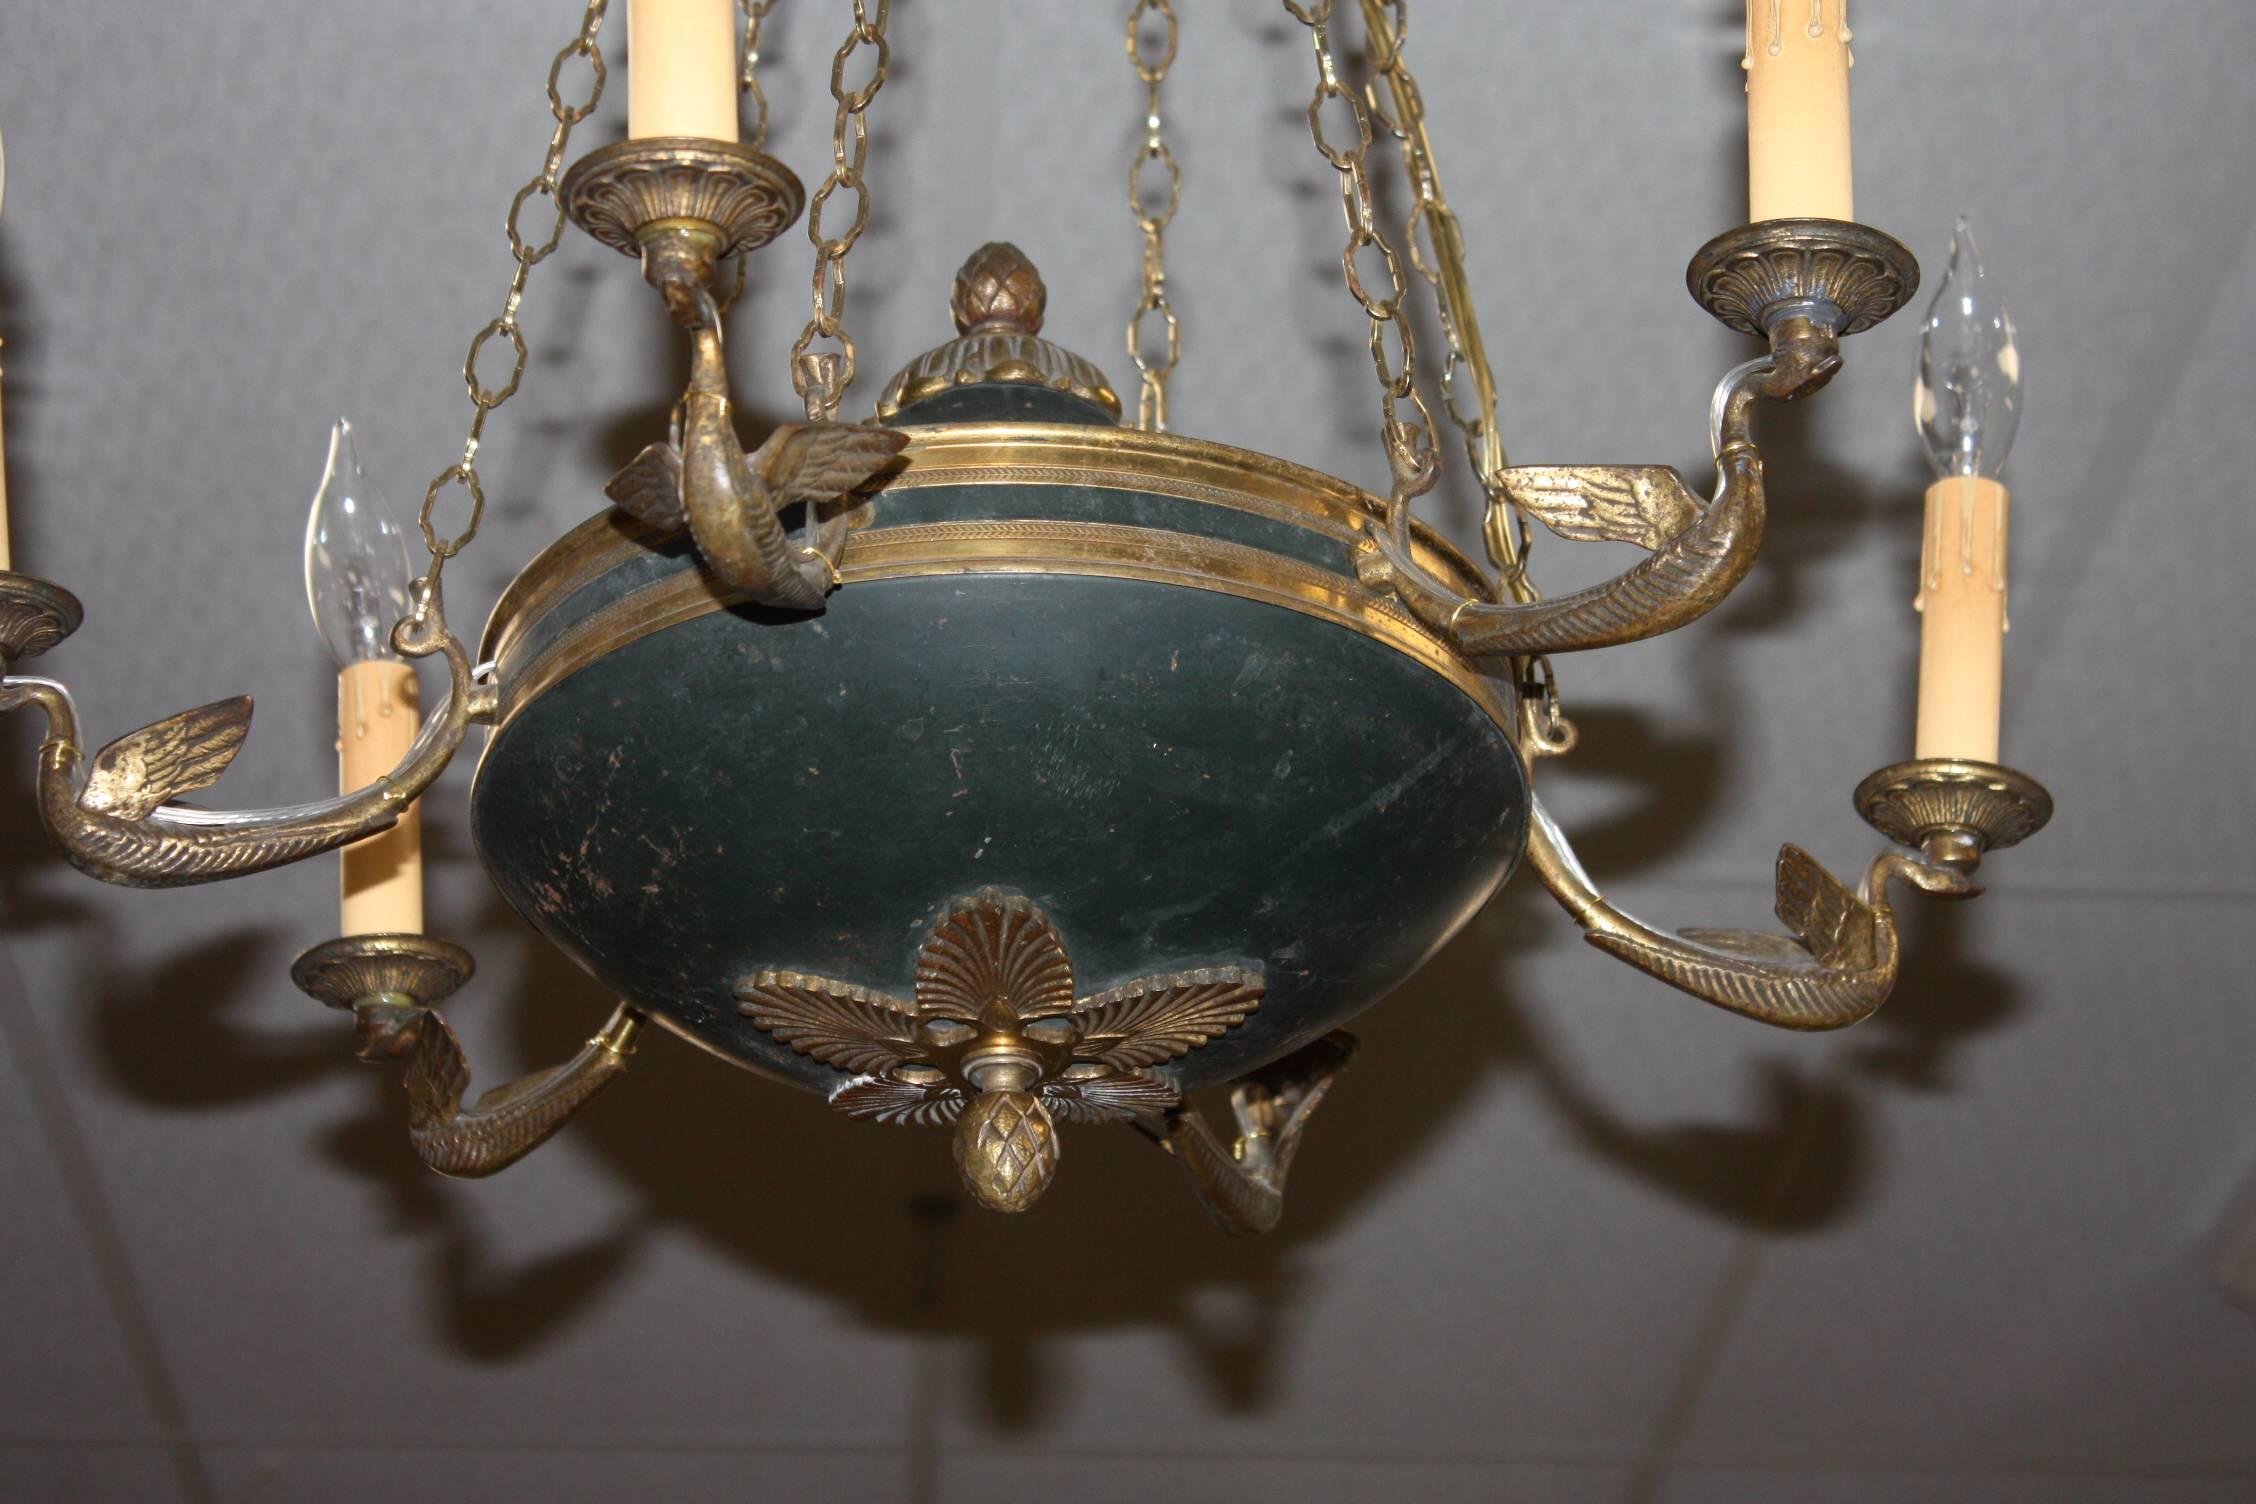 French Empire style patinated and gilt metal six-arm chandelier of oil lamp form with flambeau centre. The corona is of patinated bronze with ormolu anthemia decorated shapes above a laurel border.